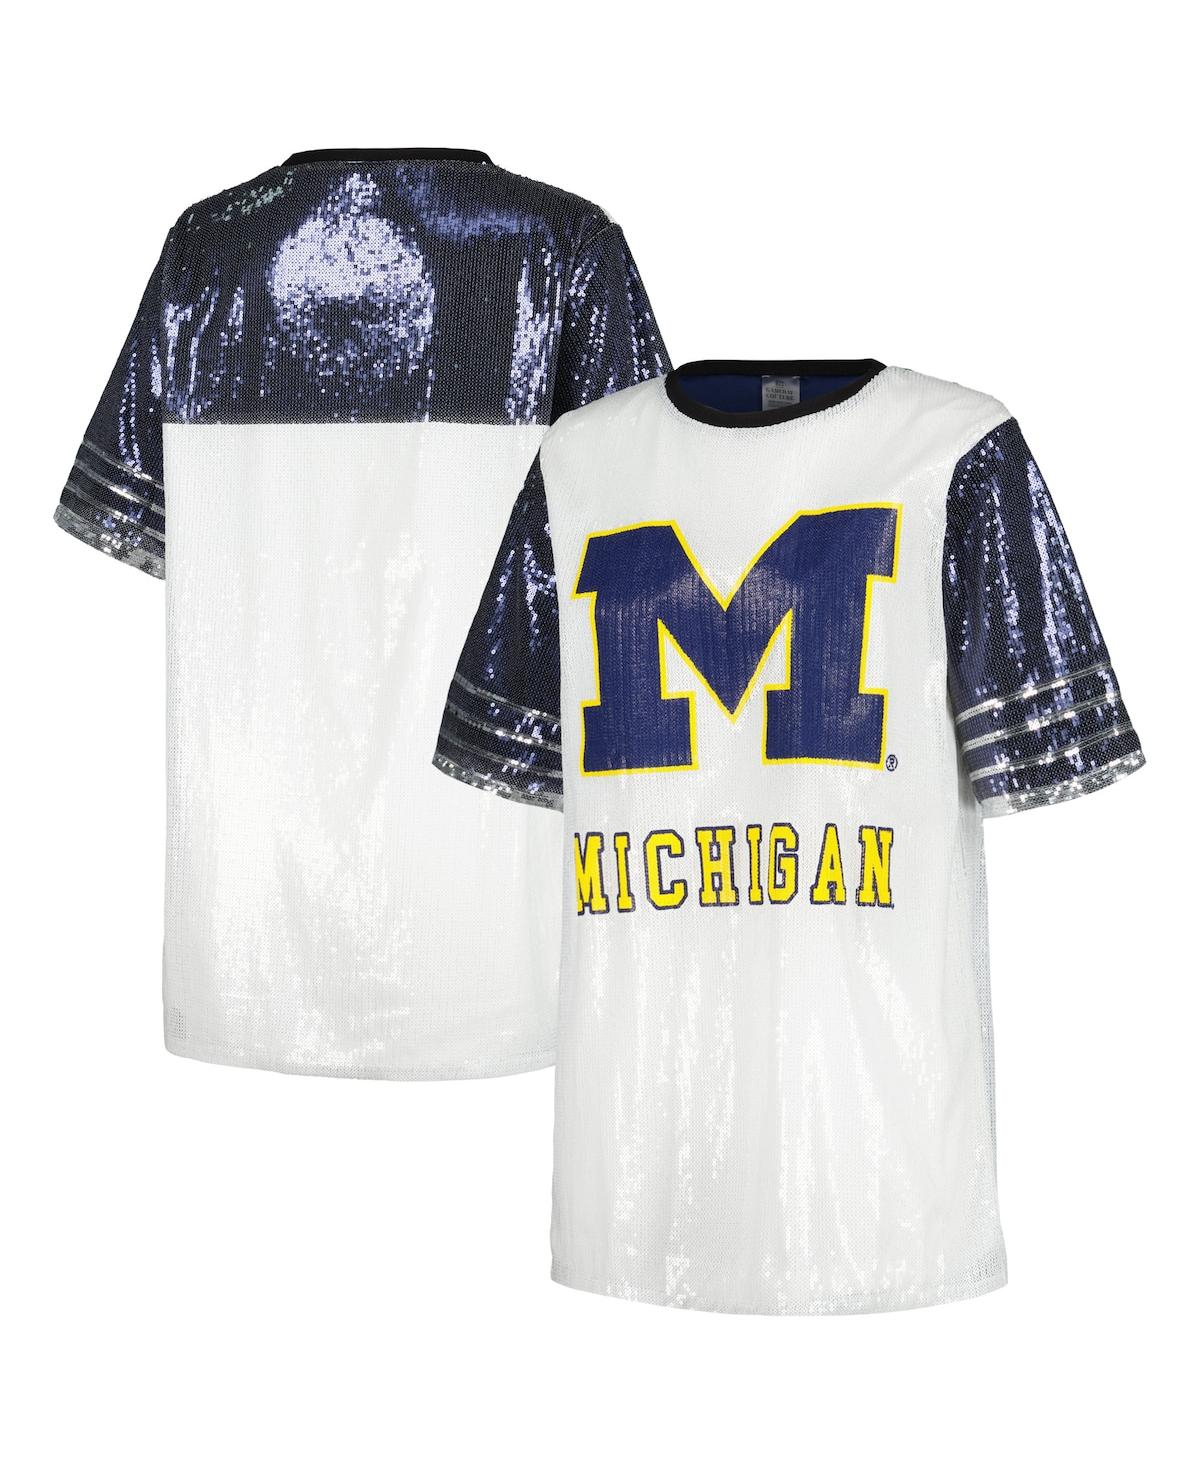 GAMEDAY COUTURE WOMEN'S GAMEDAY COUTURE WHITE MICHIGAN WOLVERINES CHIC FULL SEQUIN JERSEY DRESS